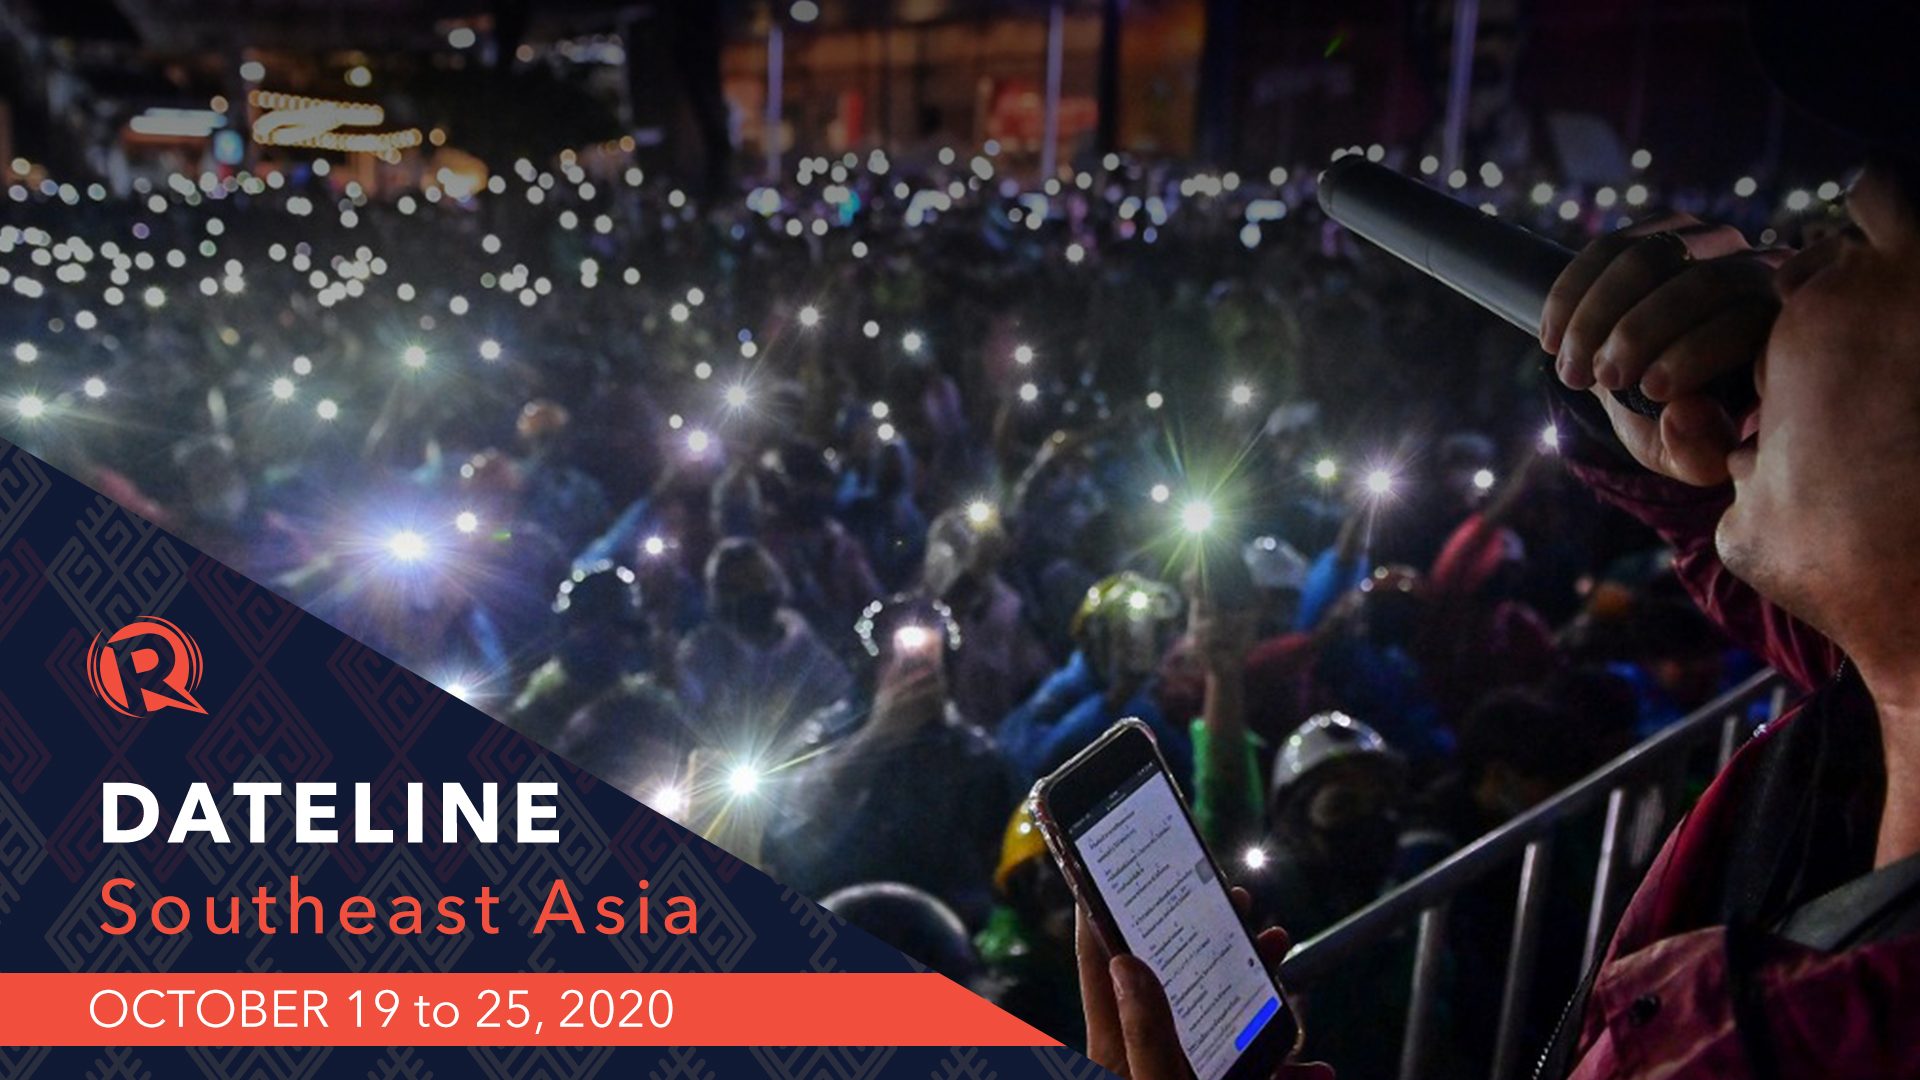 Dateline Southeast Asia – October 19 to 25, 2020